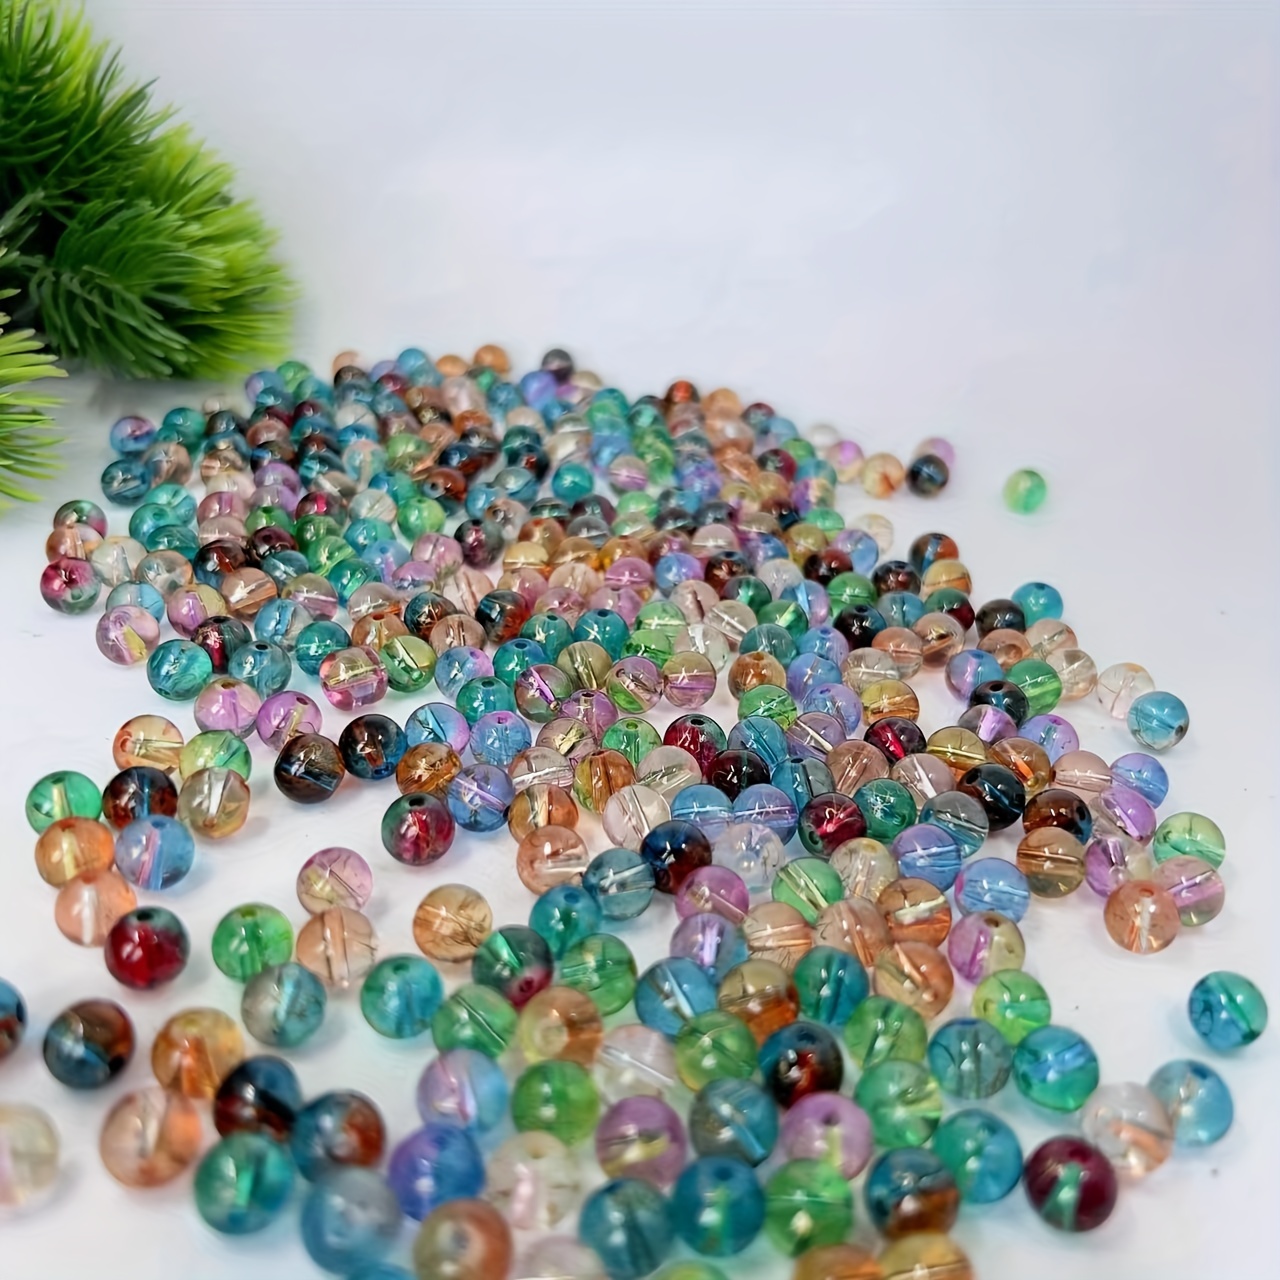 8mm Watercolor Patterned Glass Beads, Glass Beads Bulk, Unique Glass Beads,  Painted Glass Beads, Candy Colored Beads, Jewelry Making 